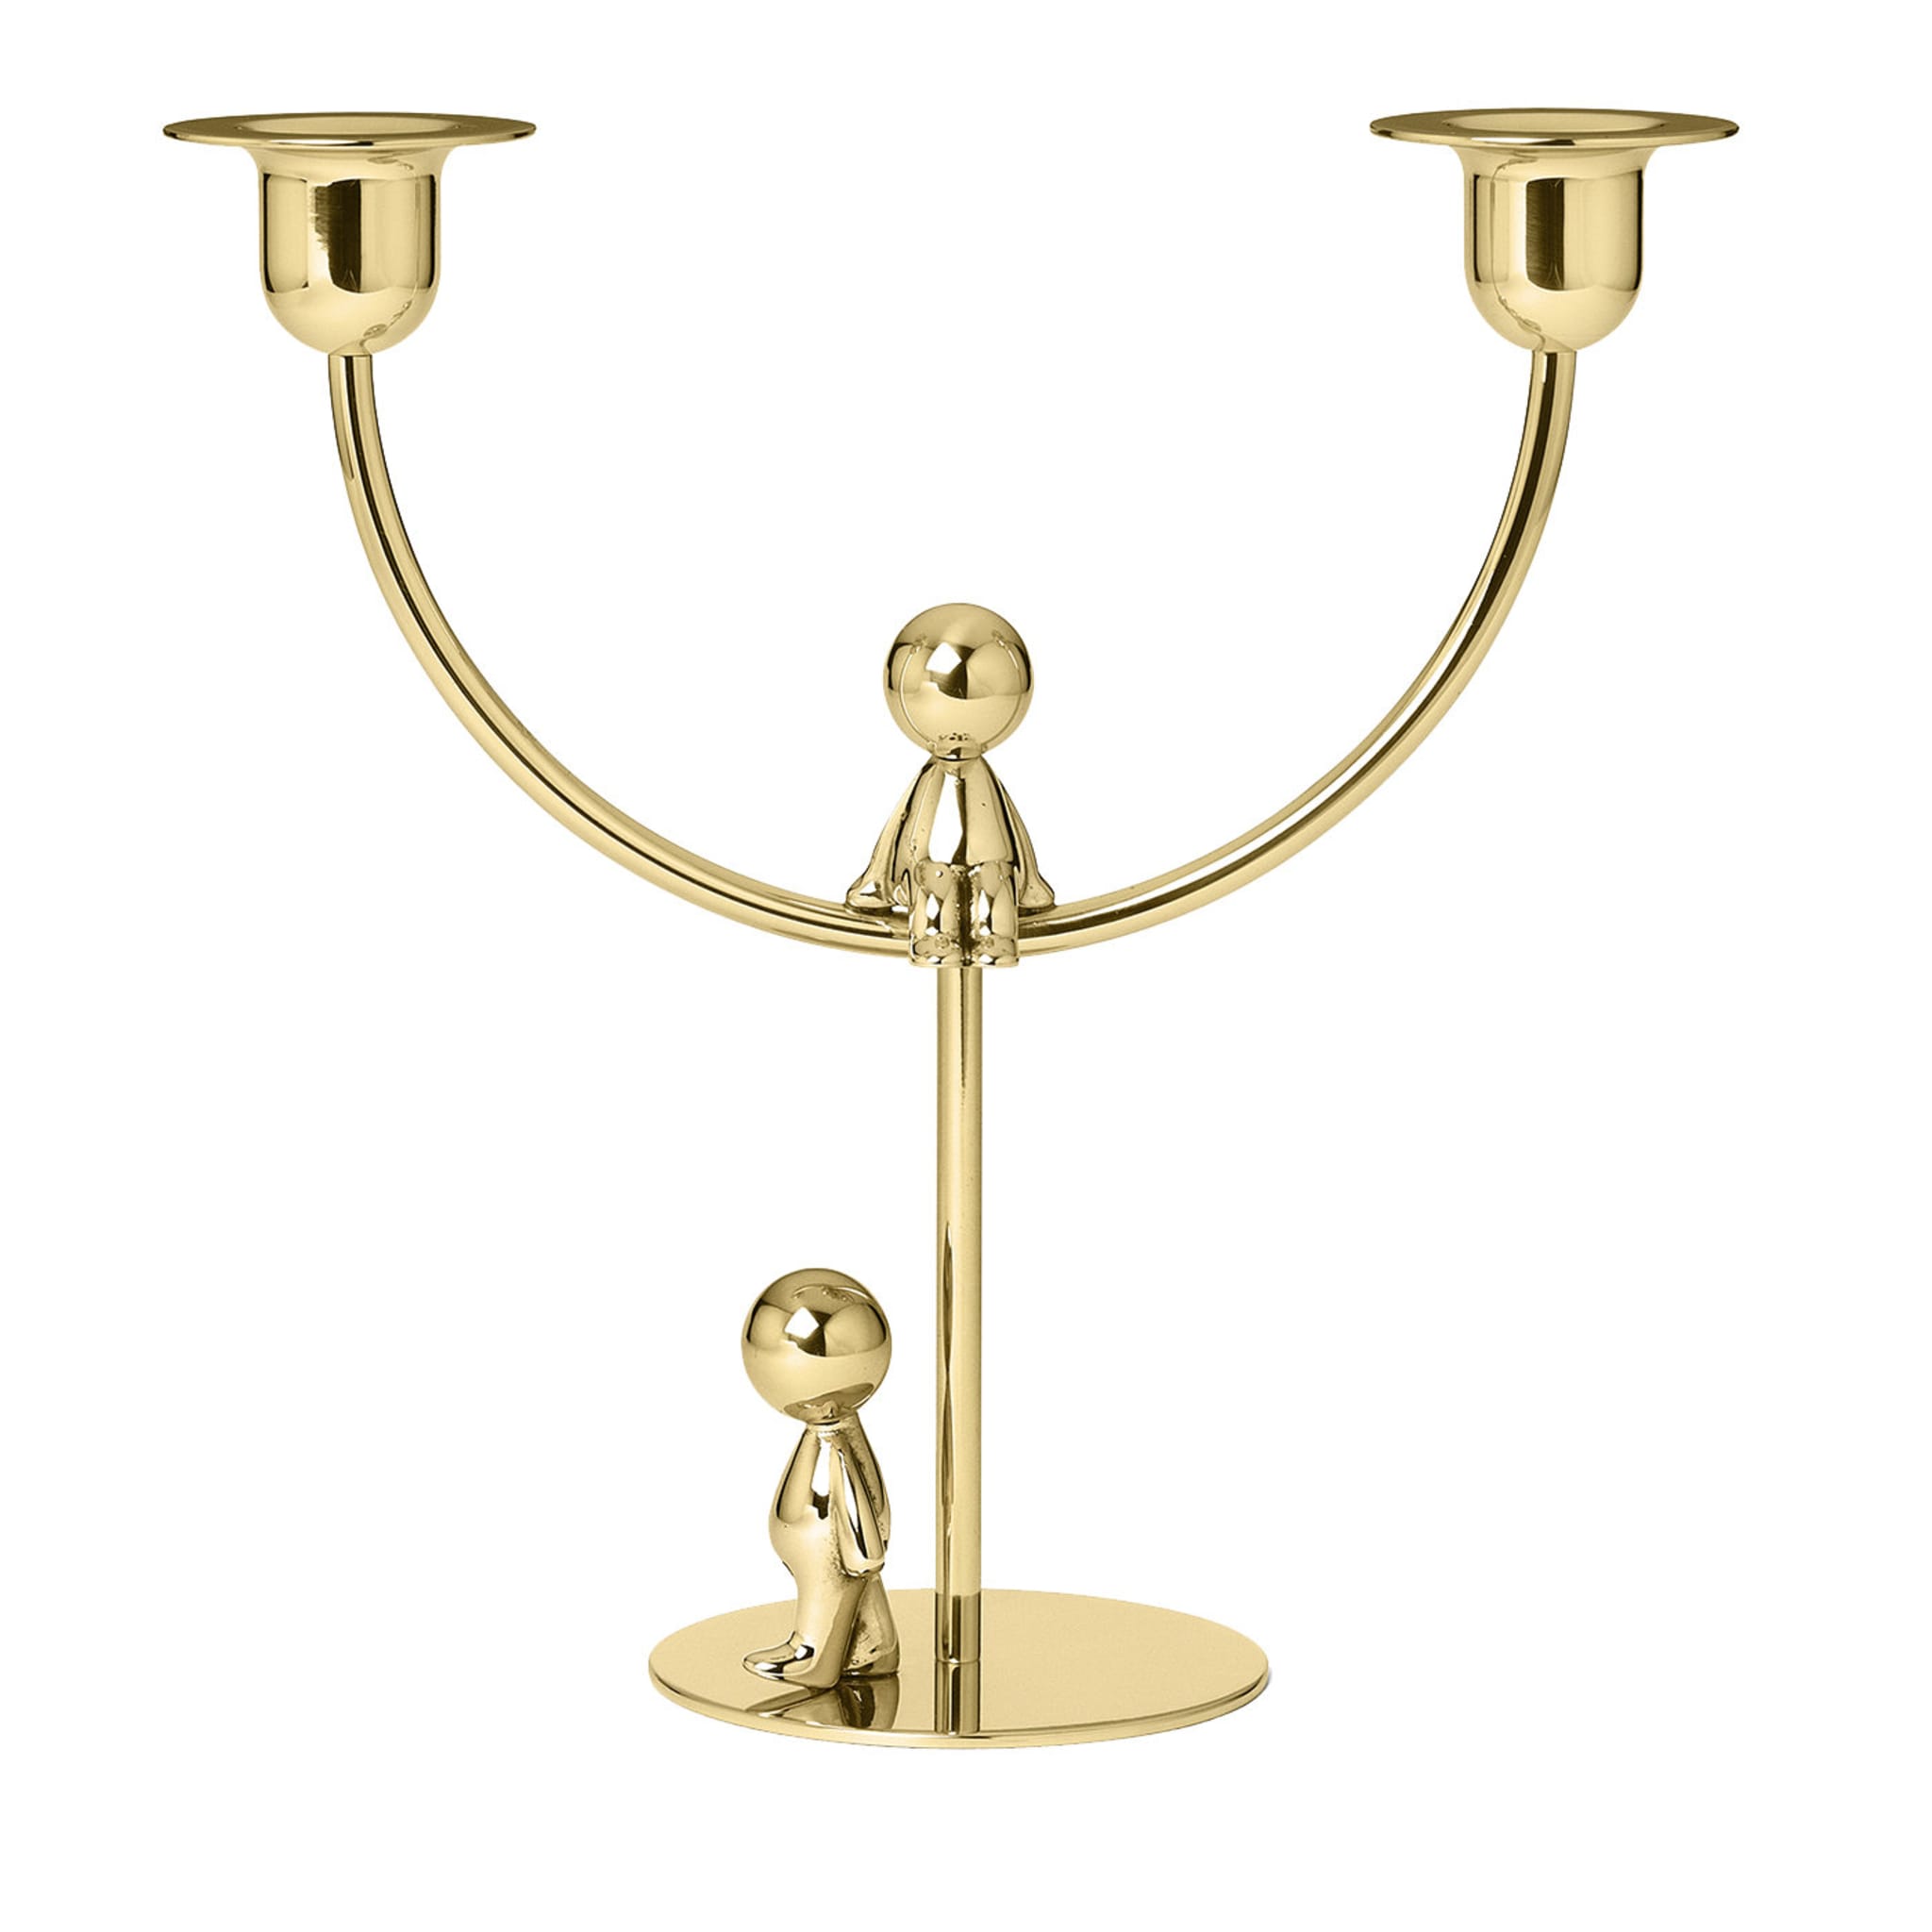 Omini Thinker Walkman Candlestick in Polished Brass By Stefano Giovannoni - Main view